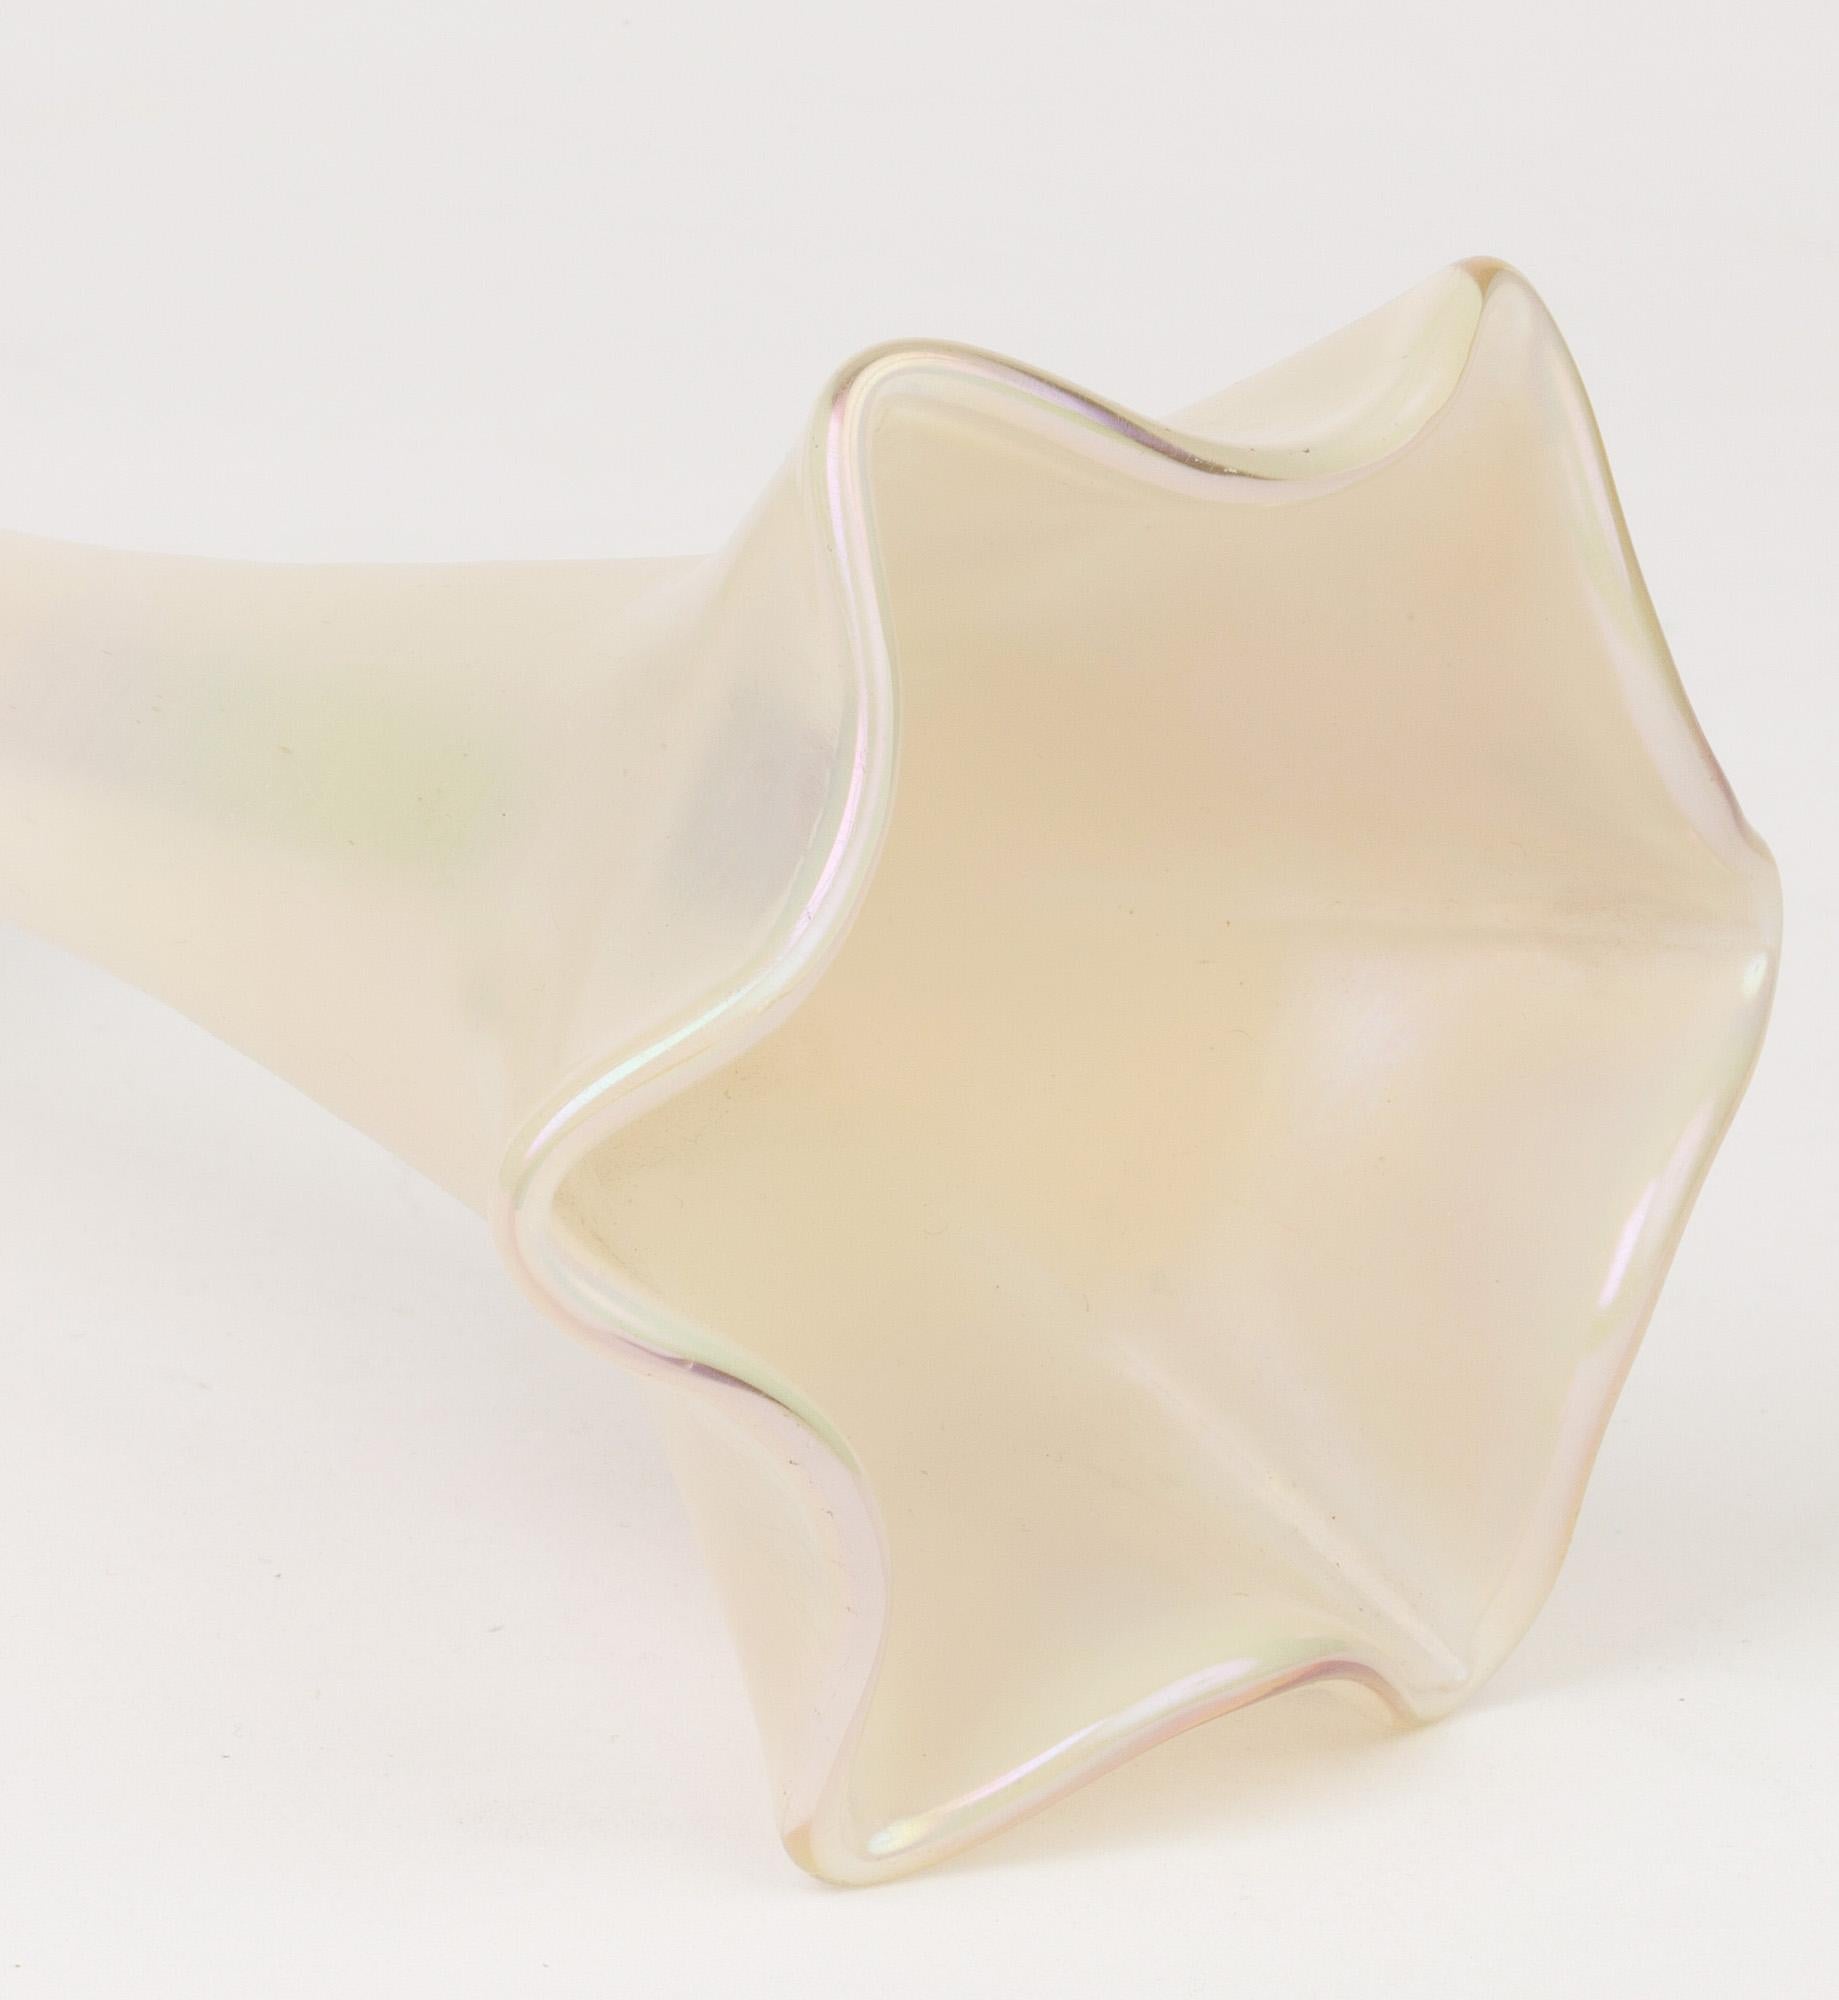 A stunning and quality Art Nouveau Austrian or Bohemian opalescent art glass vase modeled as flower stem with a pinched flower shaped top attributed to Kralik or possibly Loetz and dating from circa 1900. The vase has a thick rounded foot cased in